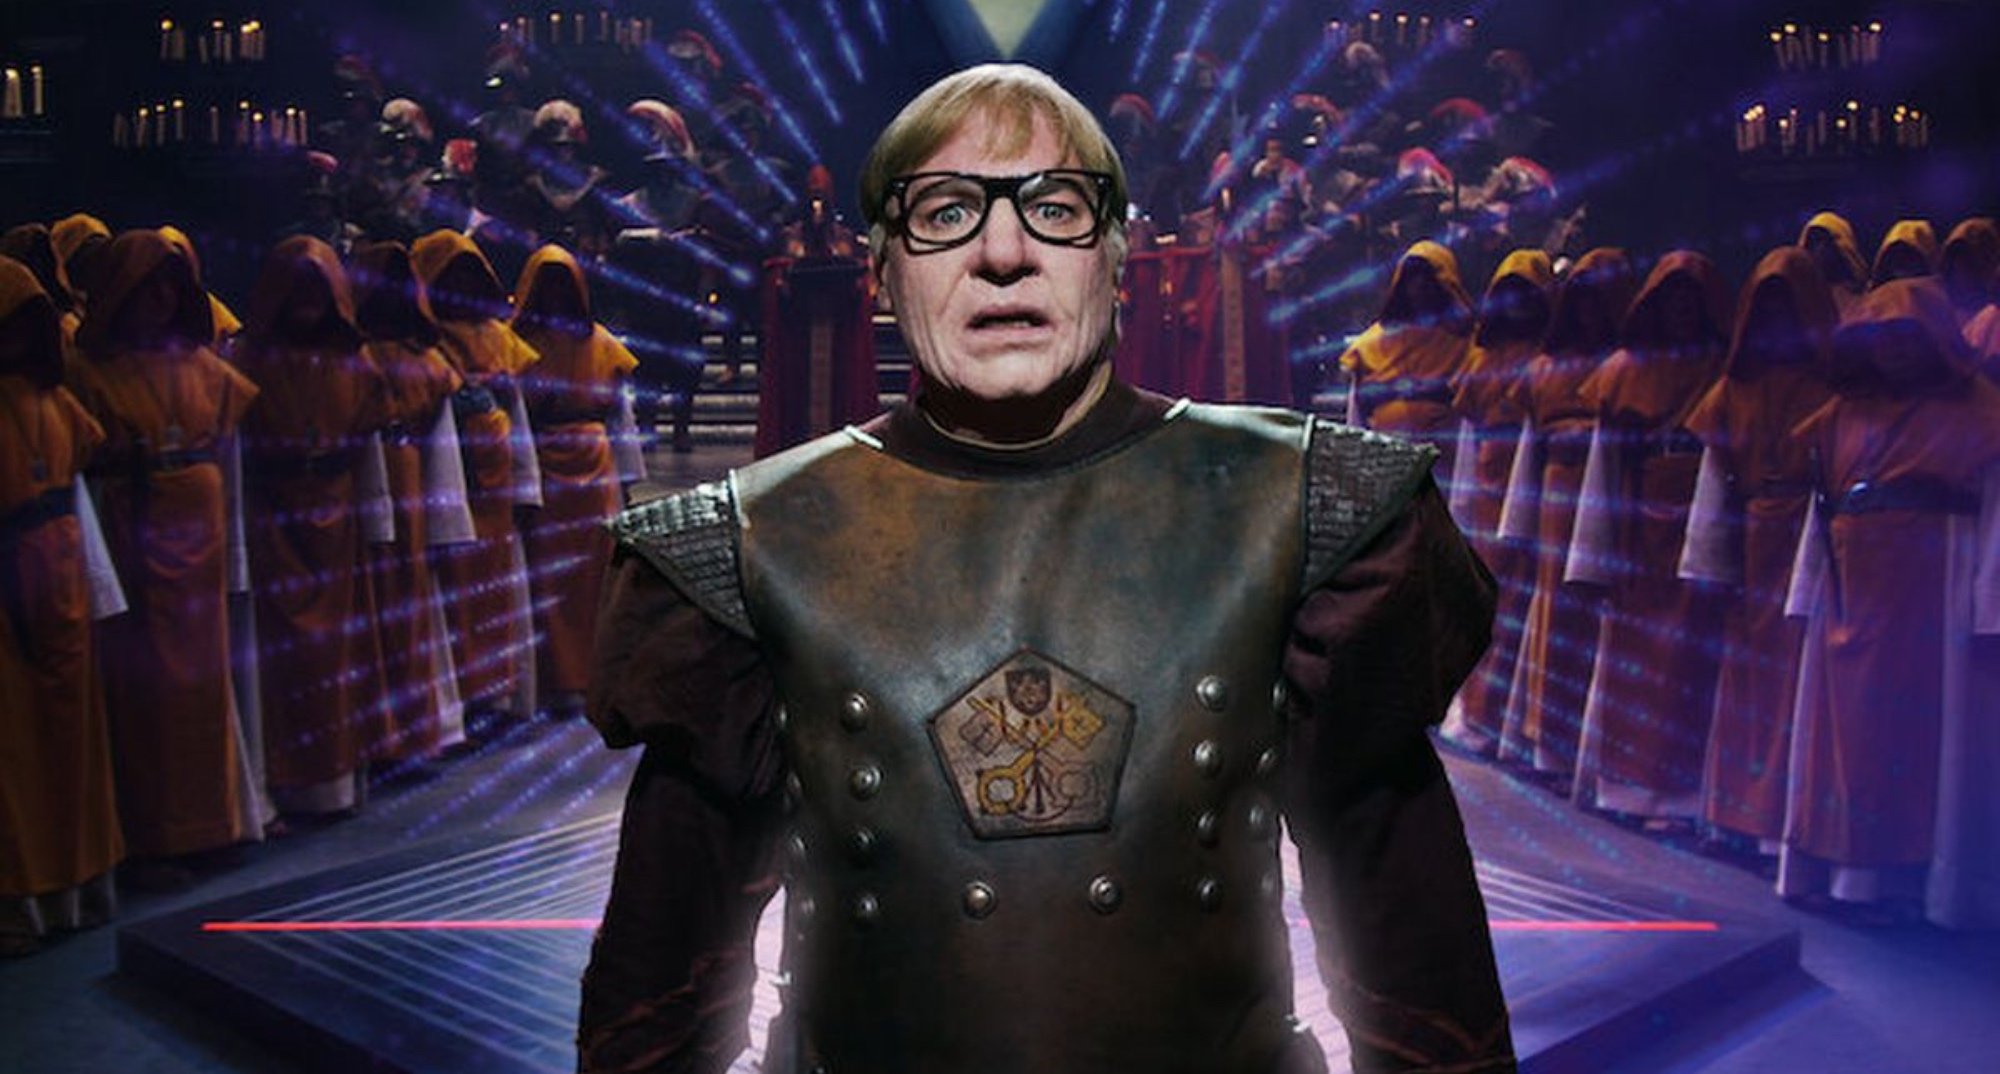 Mike Myers 'The Pentaverate' limited series wearing a suit of armor.